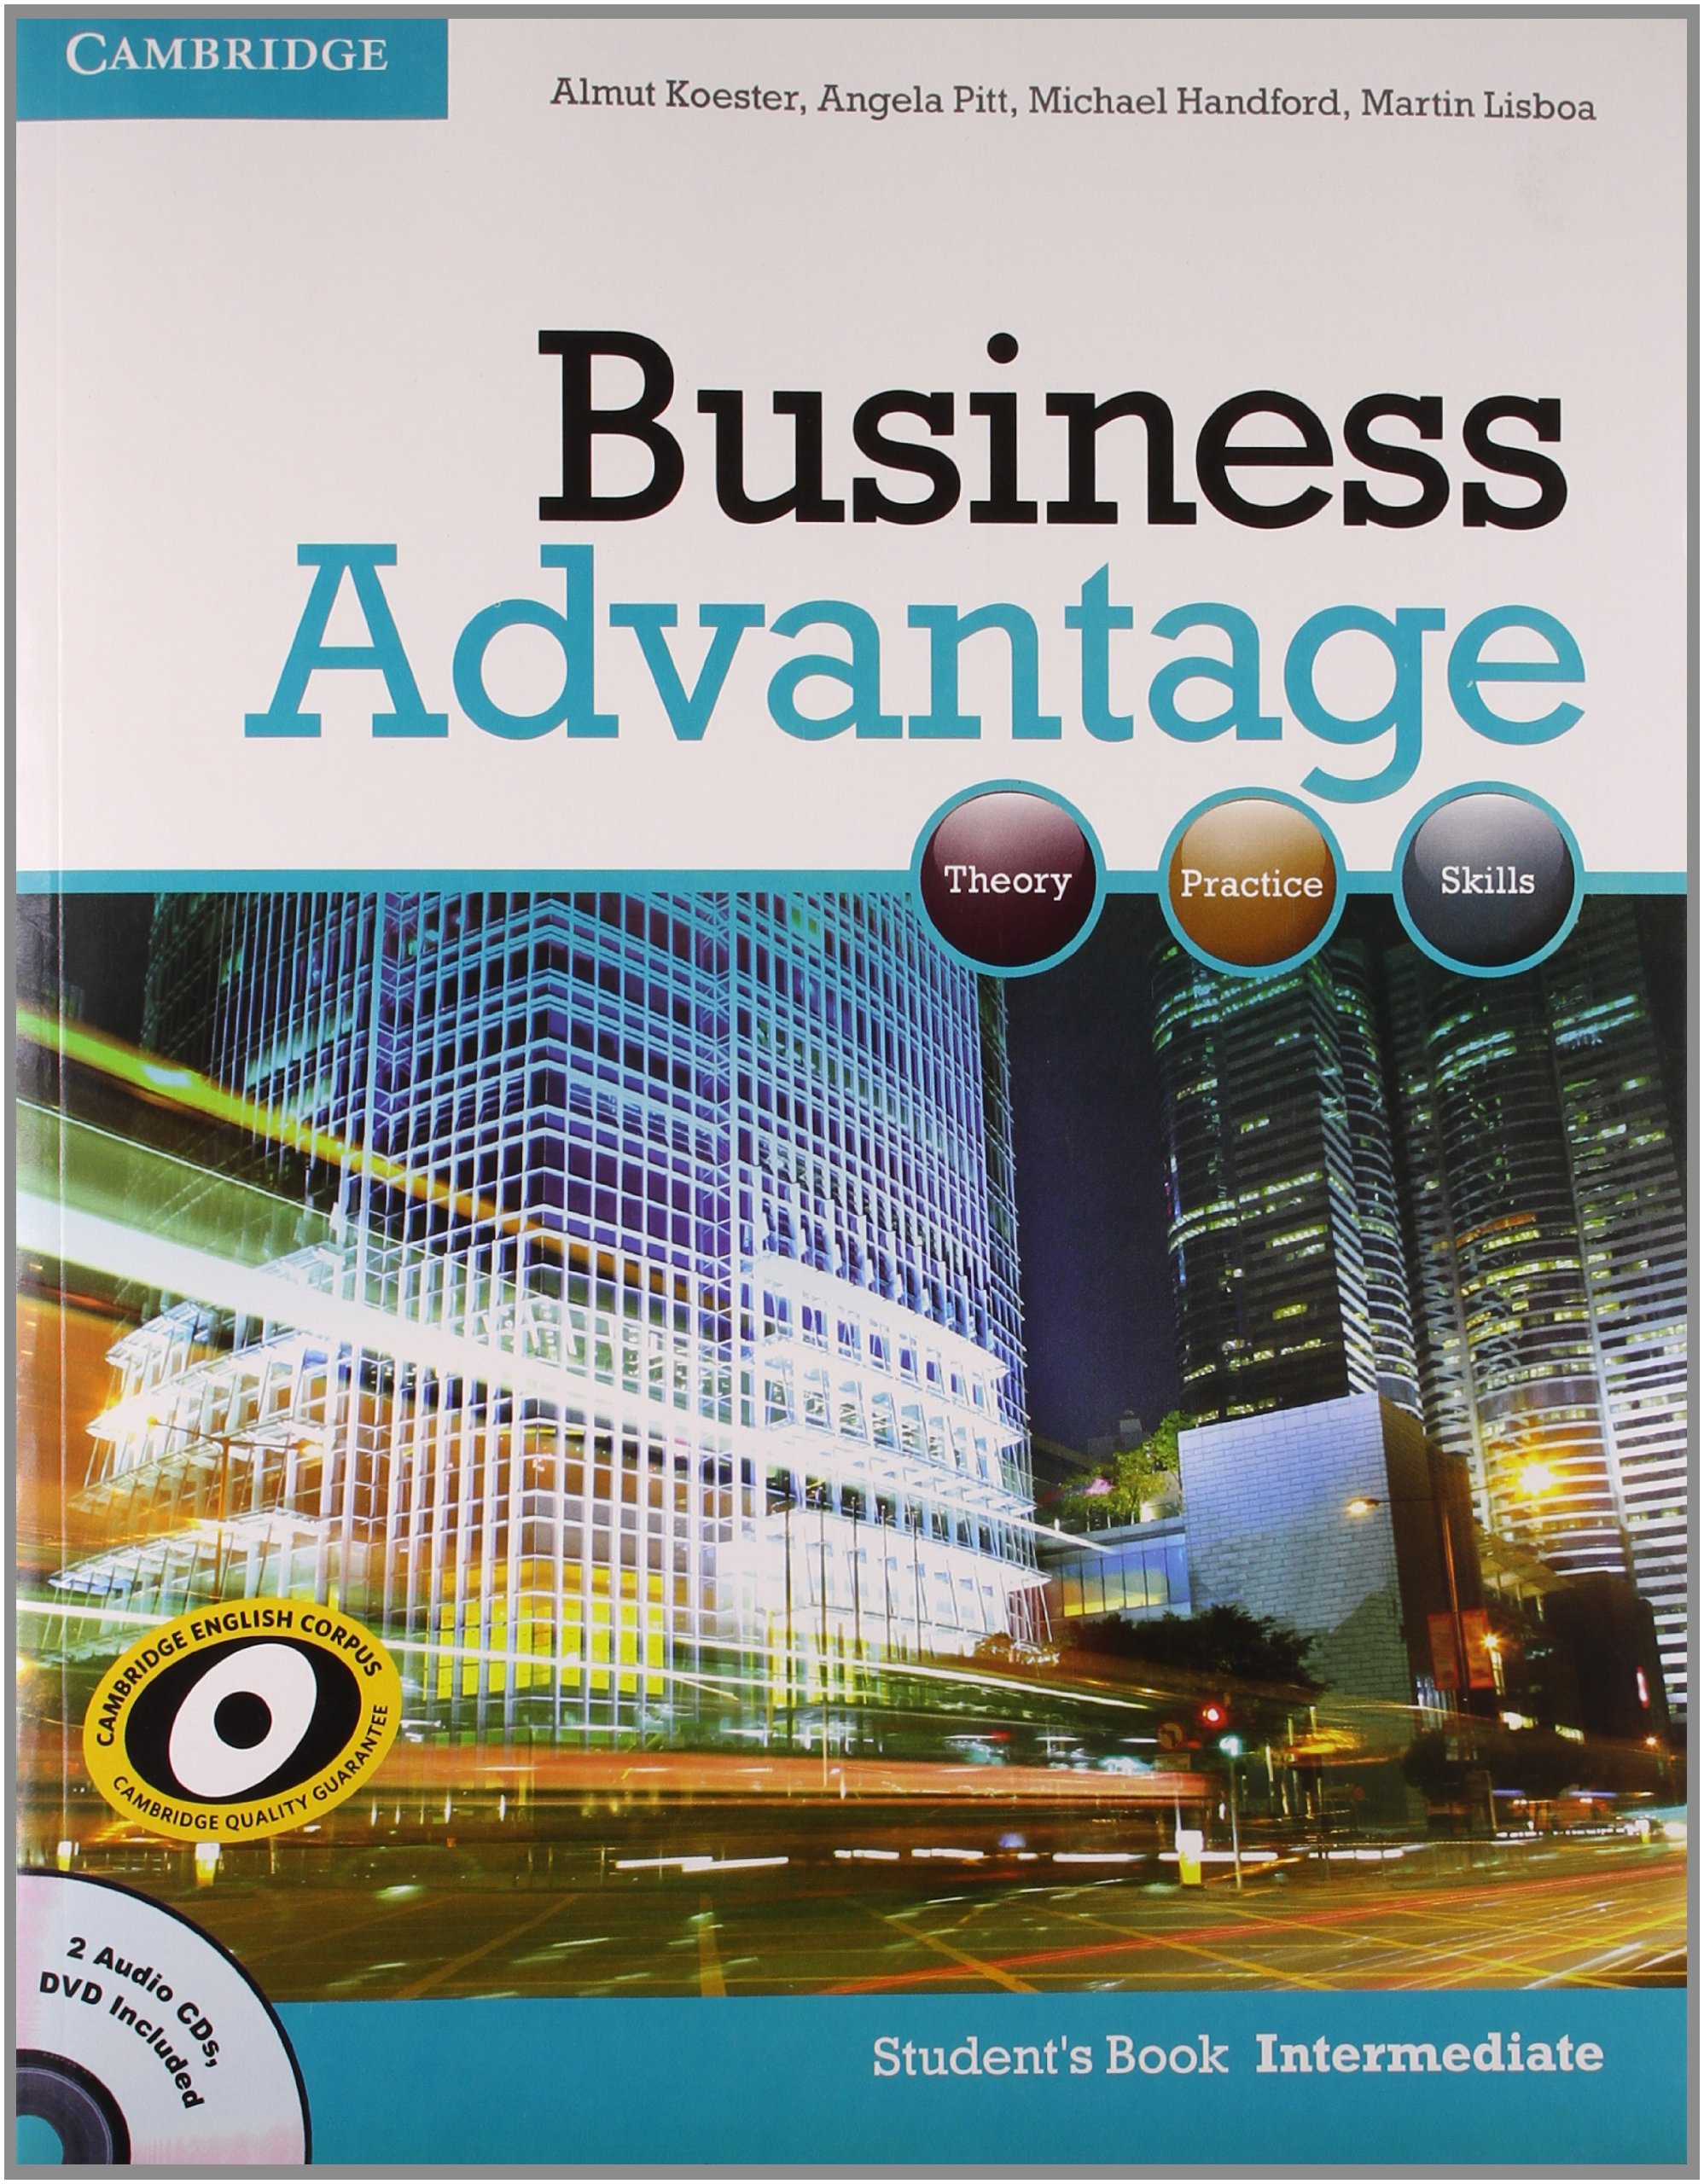 Business Advantage: Theory, Practice, Skills - Students Book Intermediate (with 2 CD's and 1 DVD)